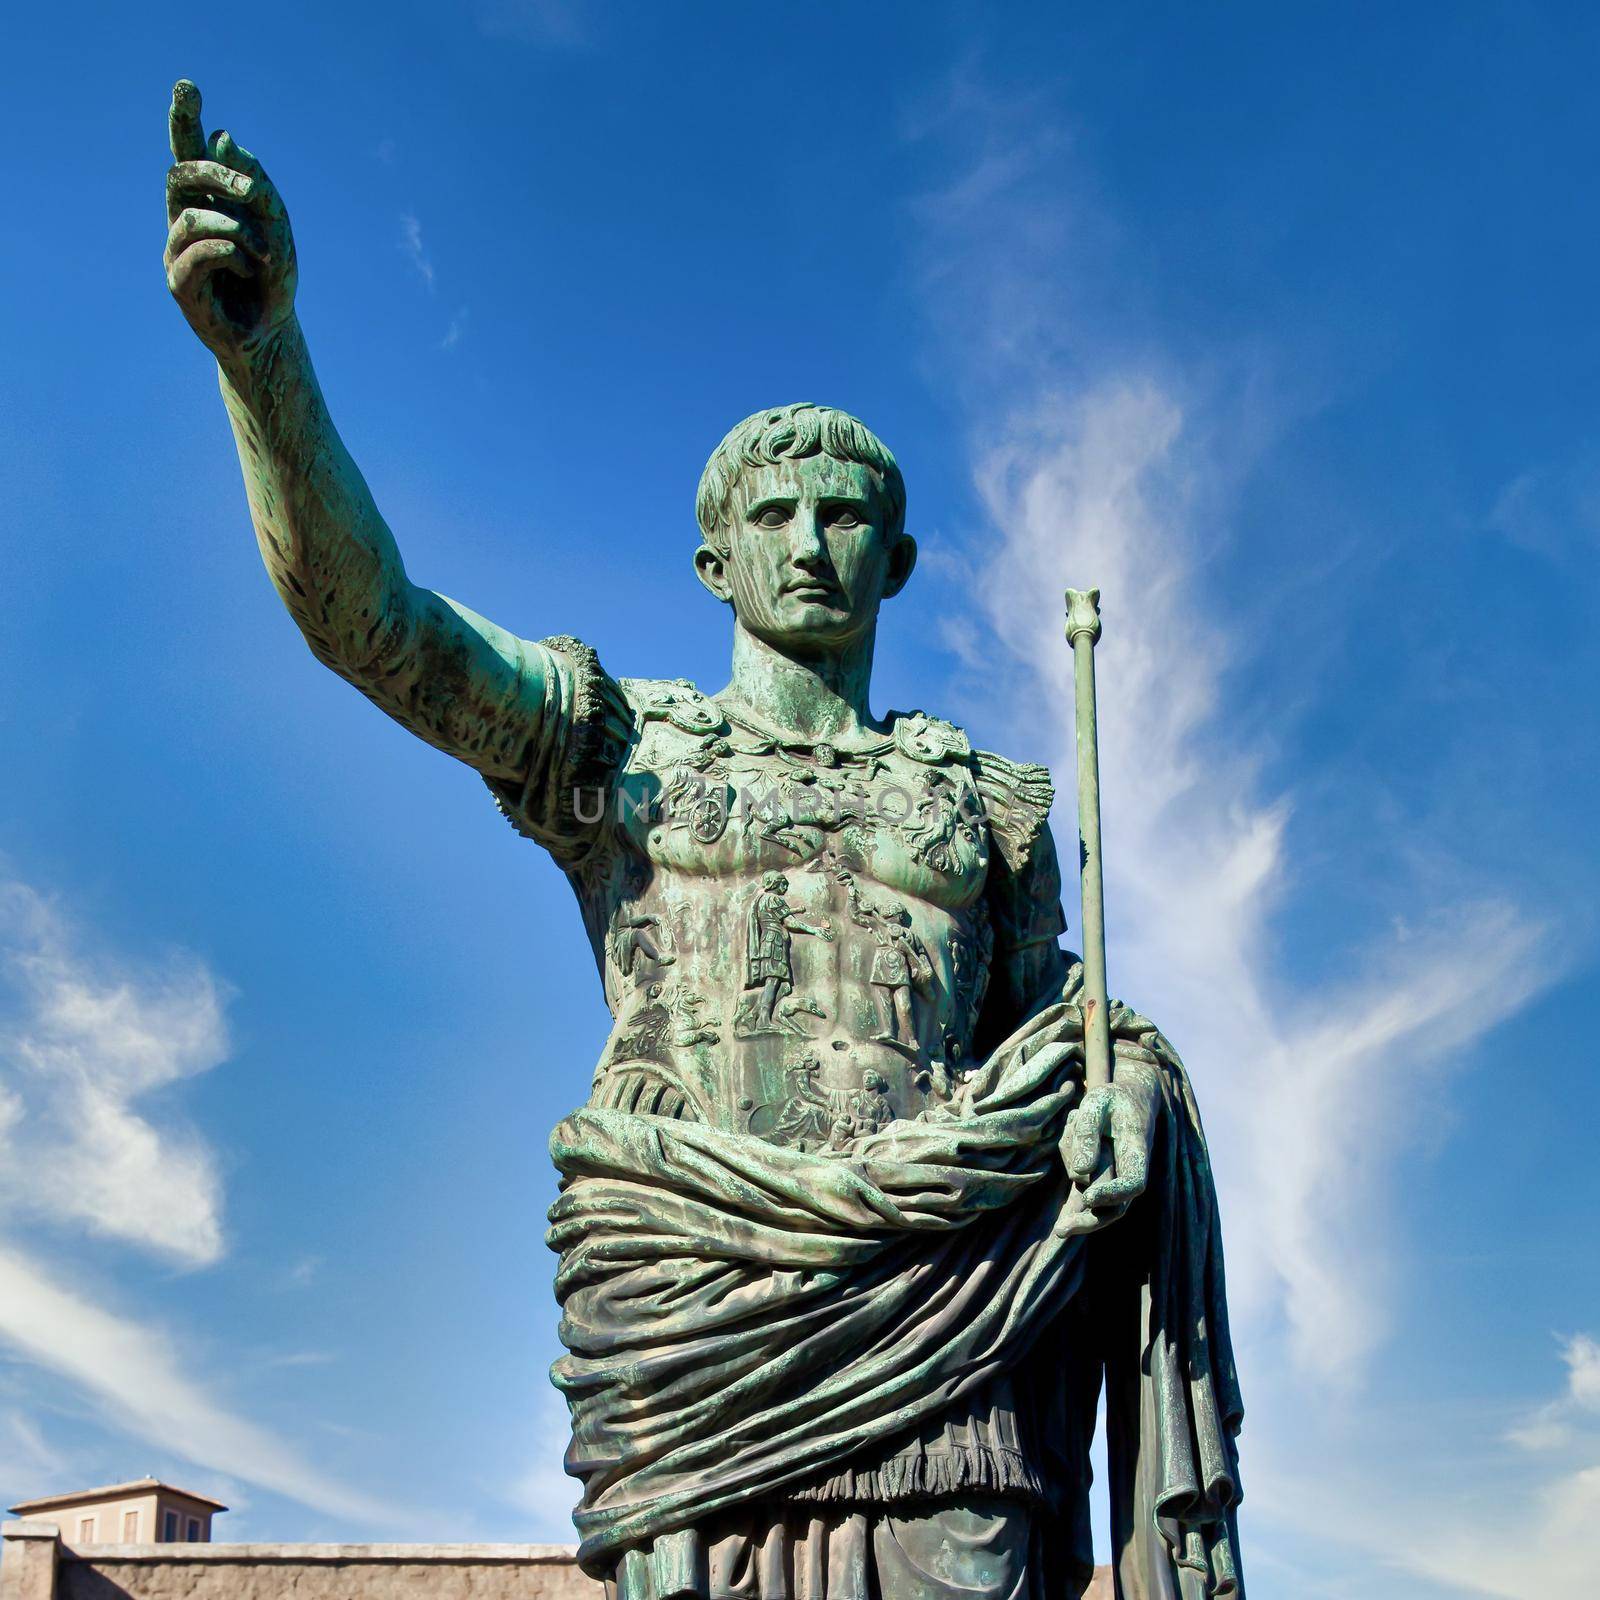 The roman emperor Gaius Julius Caesar statue in Rome, Italy. Concept for authority, domination, leadership and guidance. by Perseomedusa